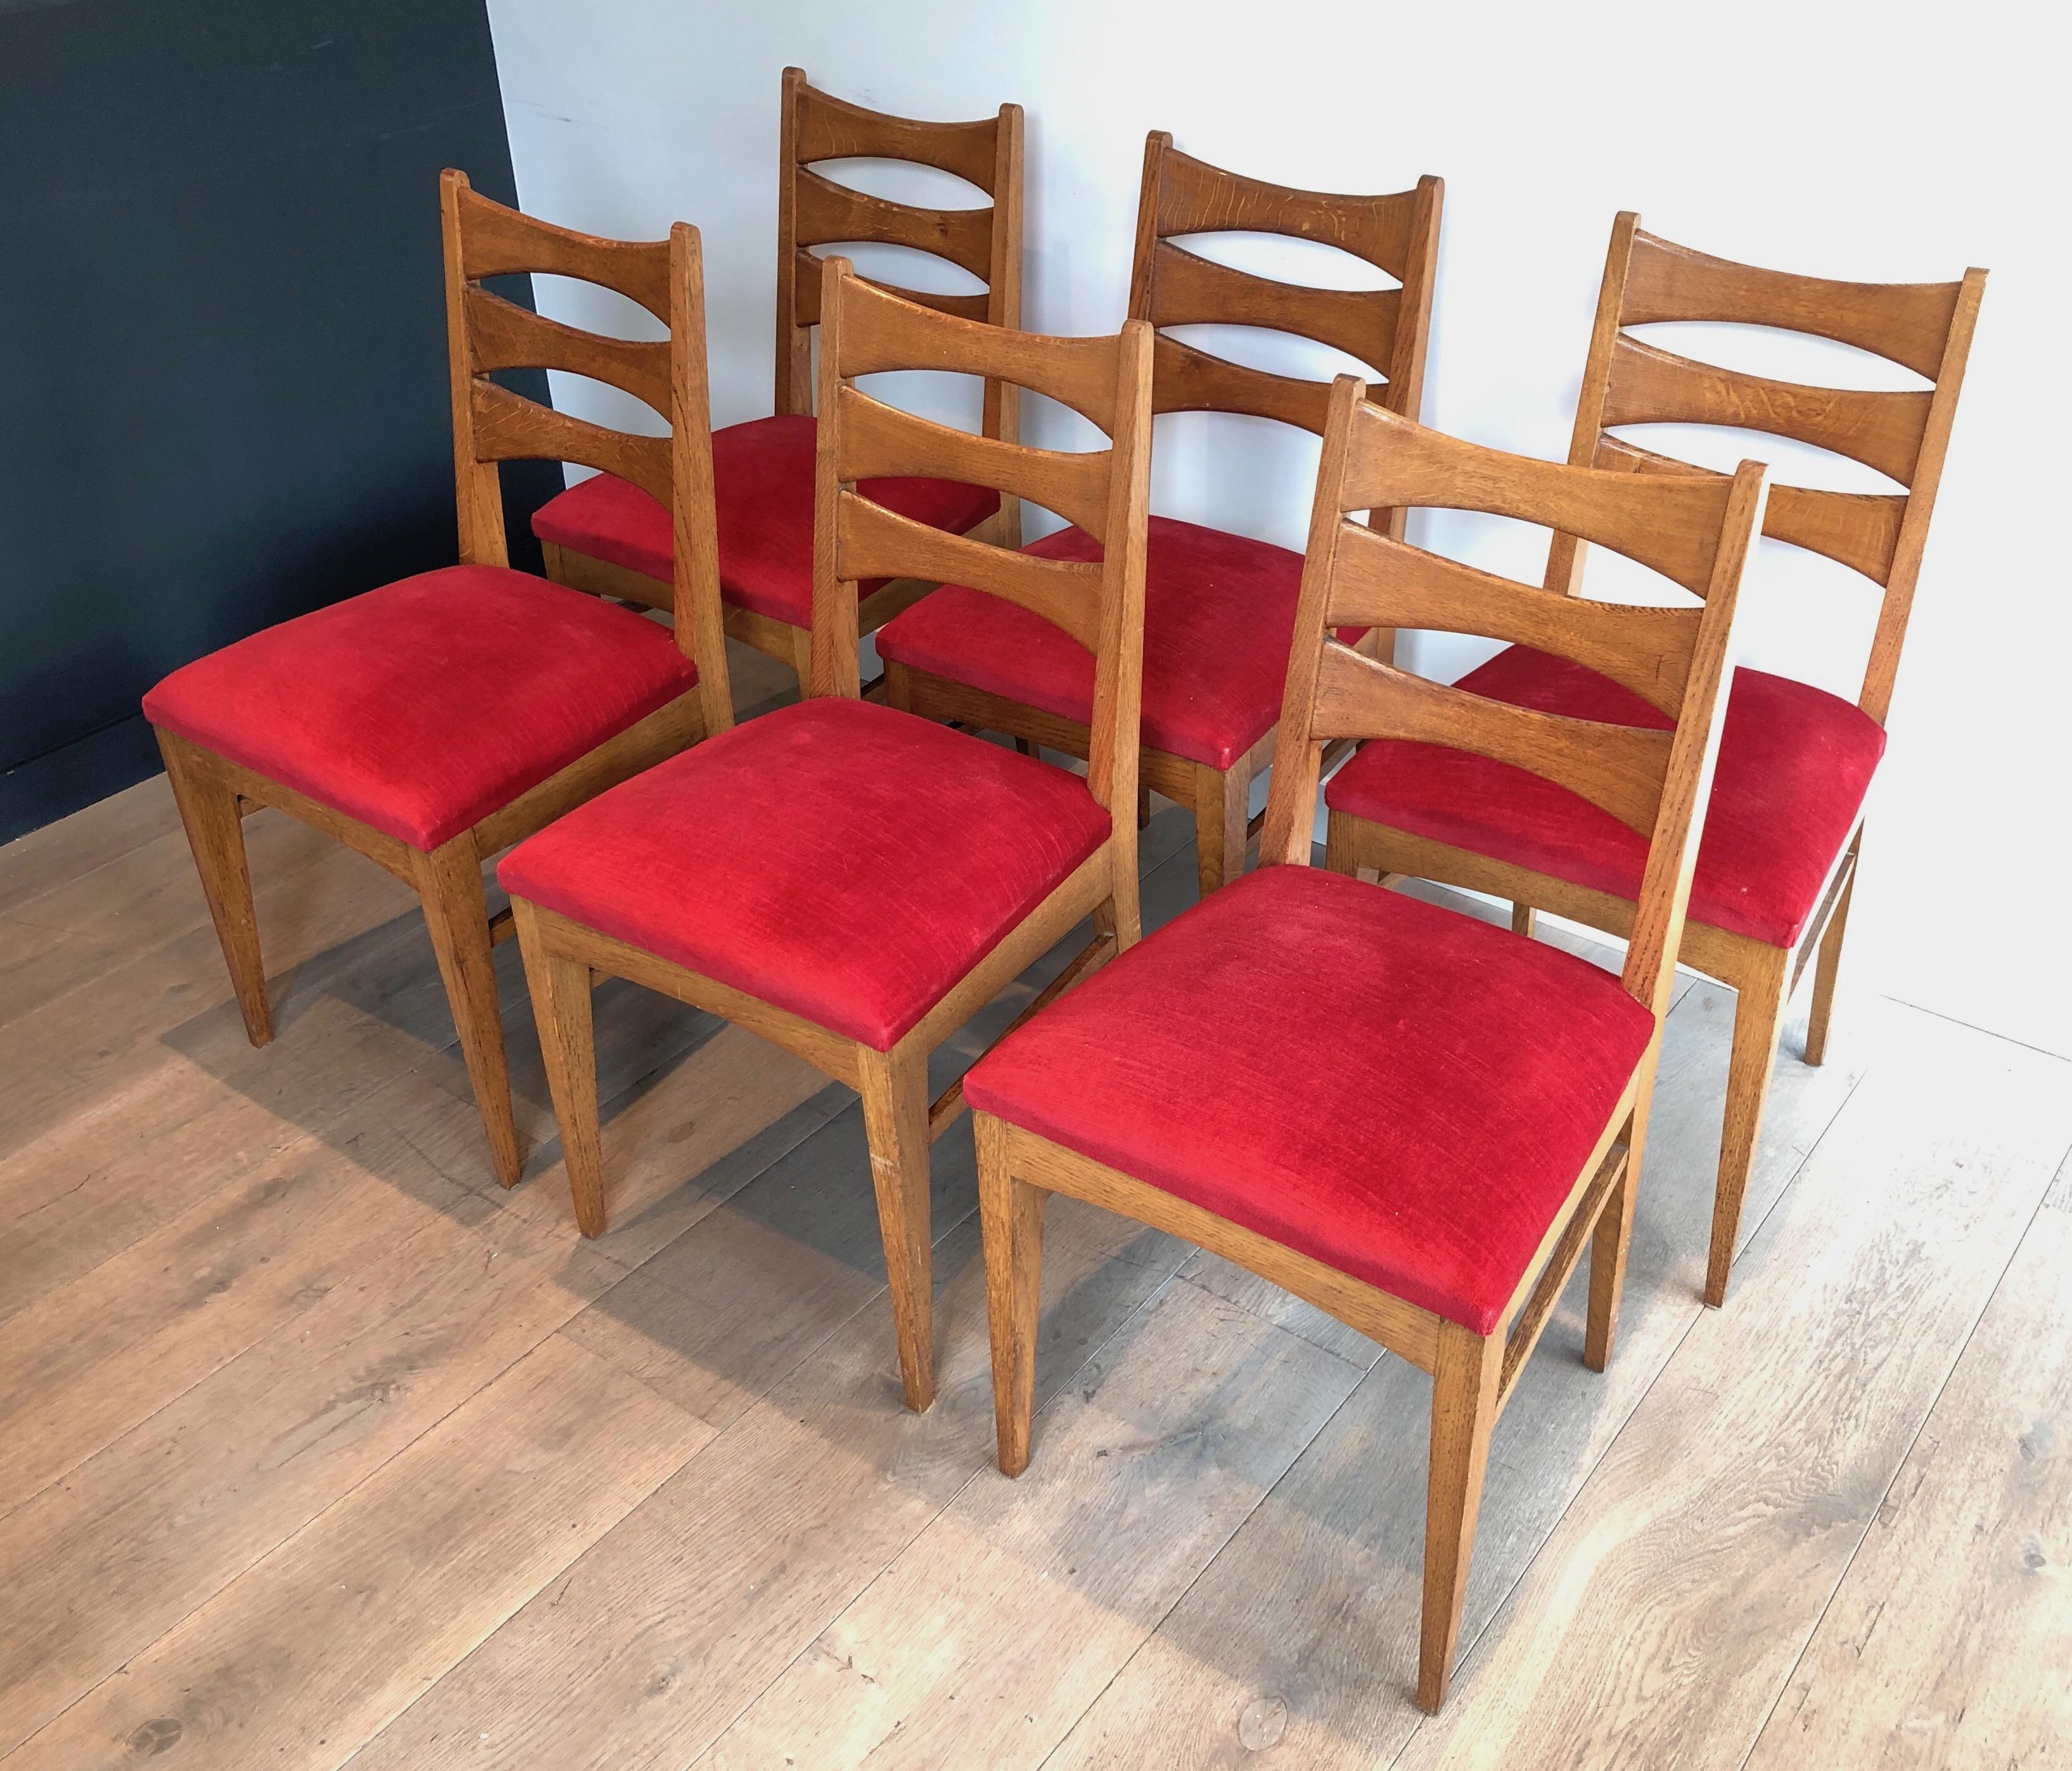 This set of 6 chairs is made of oak with red velvet seats. The design is very interesting and typical from 1950's French Work. Circa 1950.